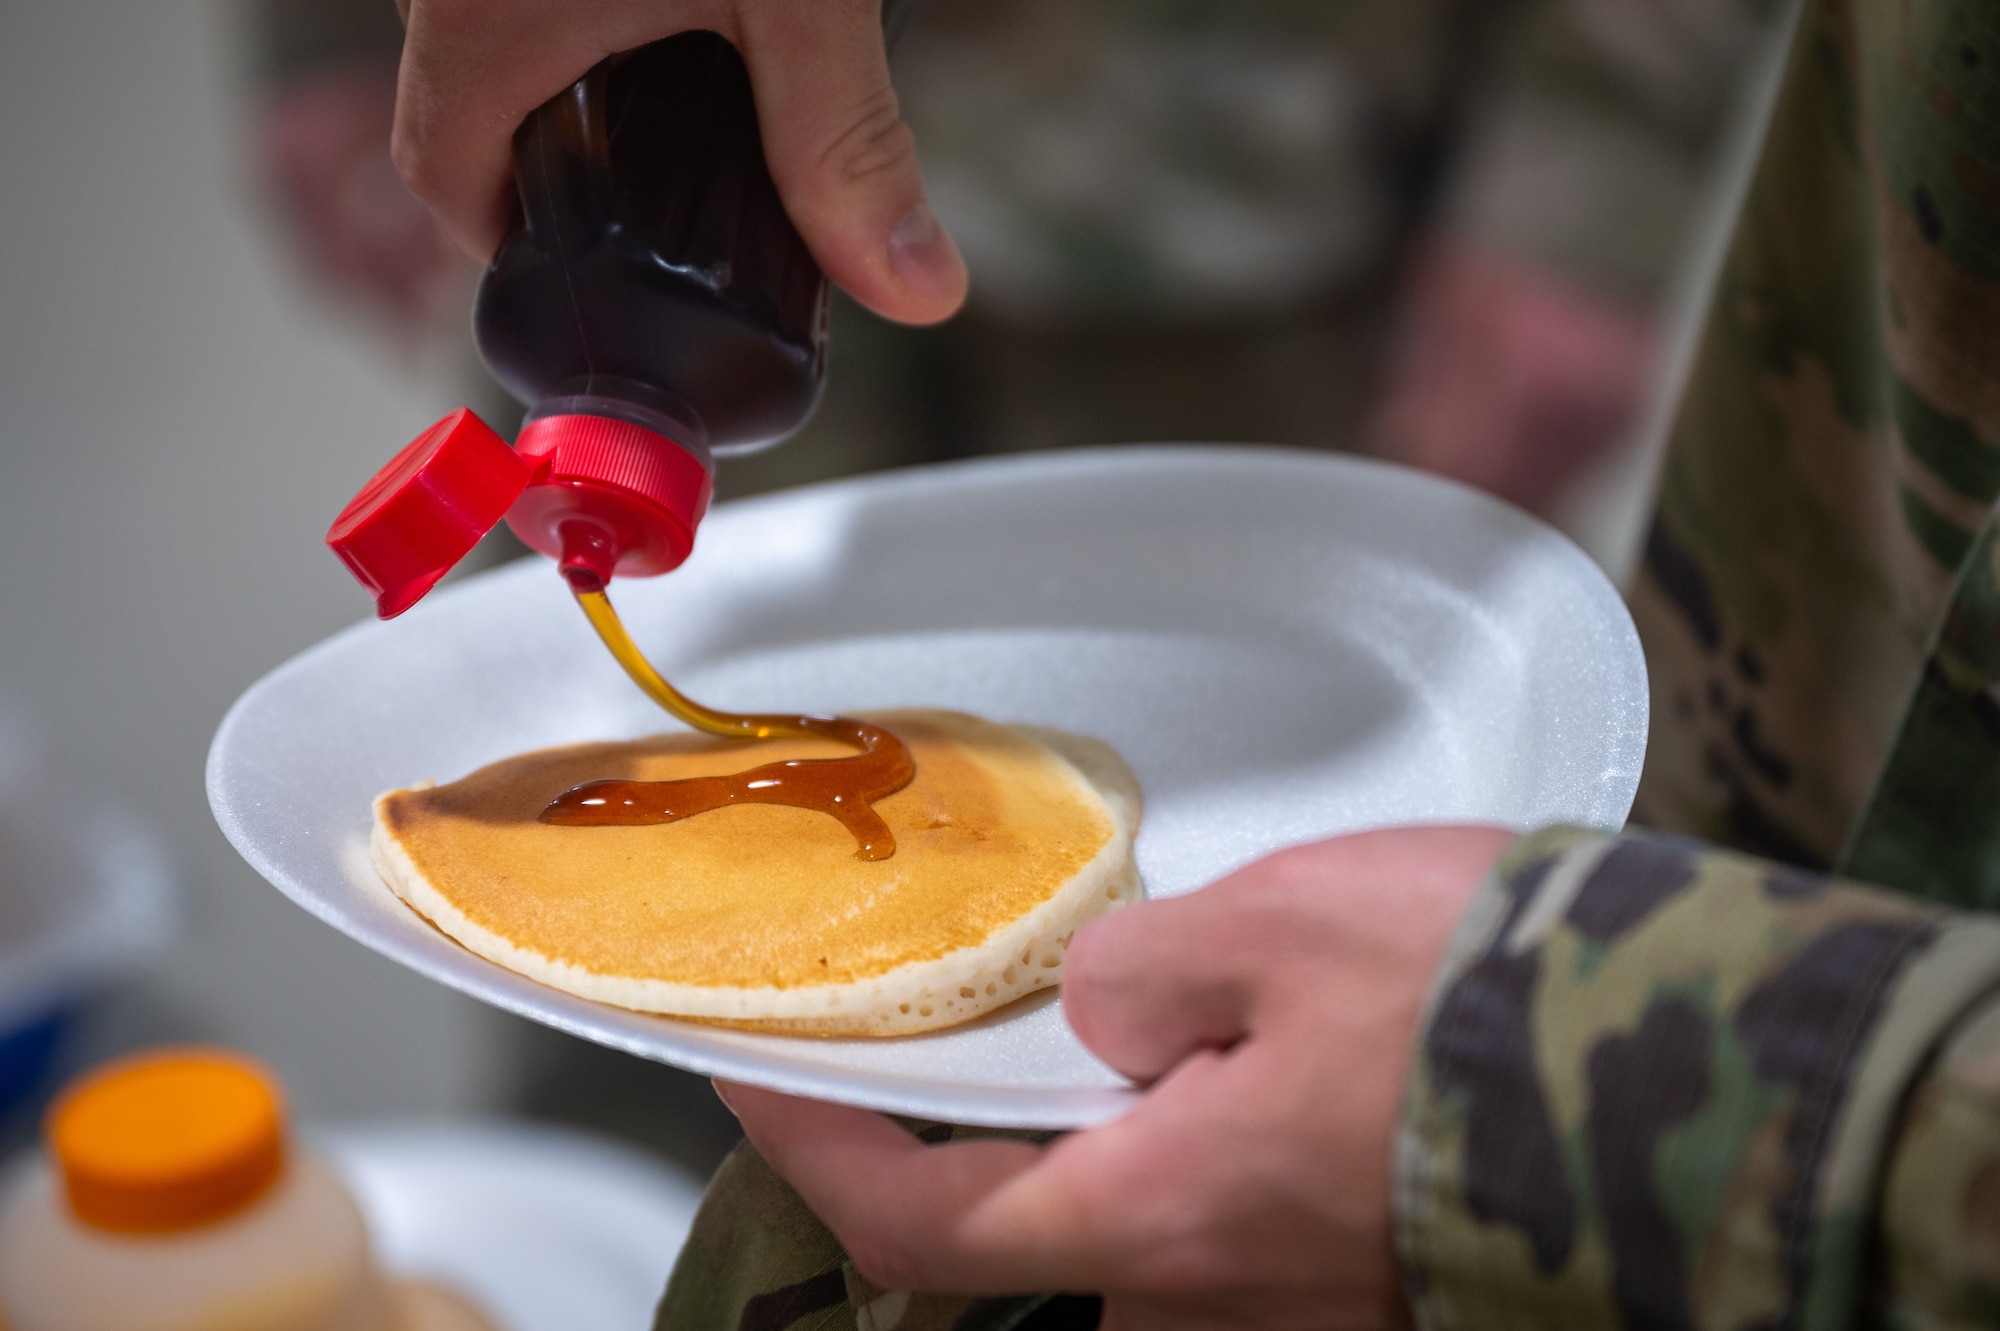 A dorm resident pours syrup on his pancake during the “Storm the Dorm” event